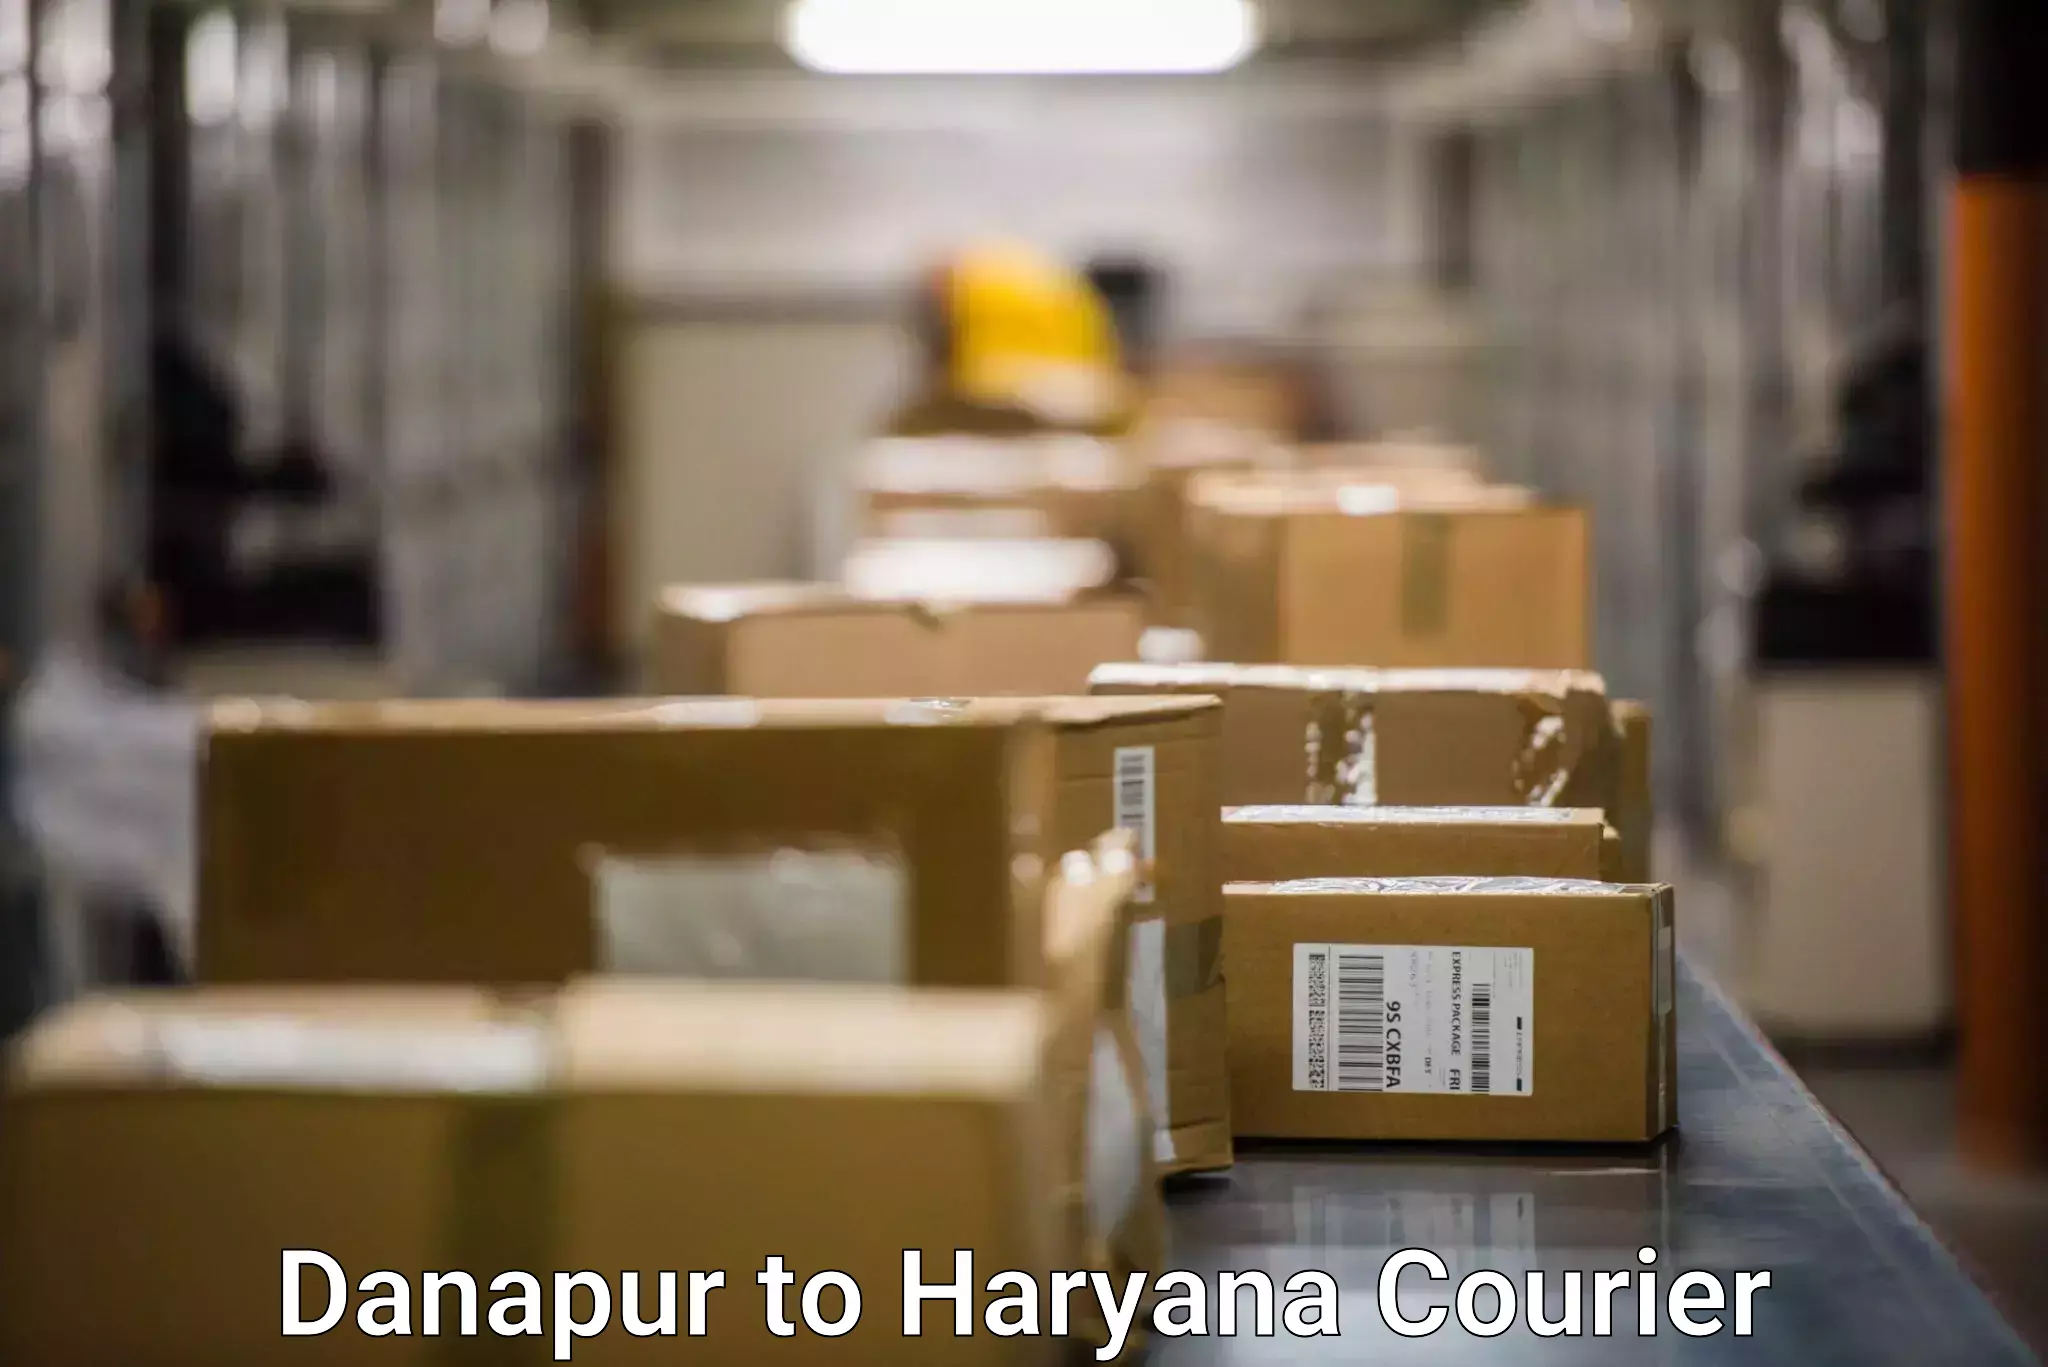 Courier service booking in Danapur to Bilaspur Haryana